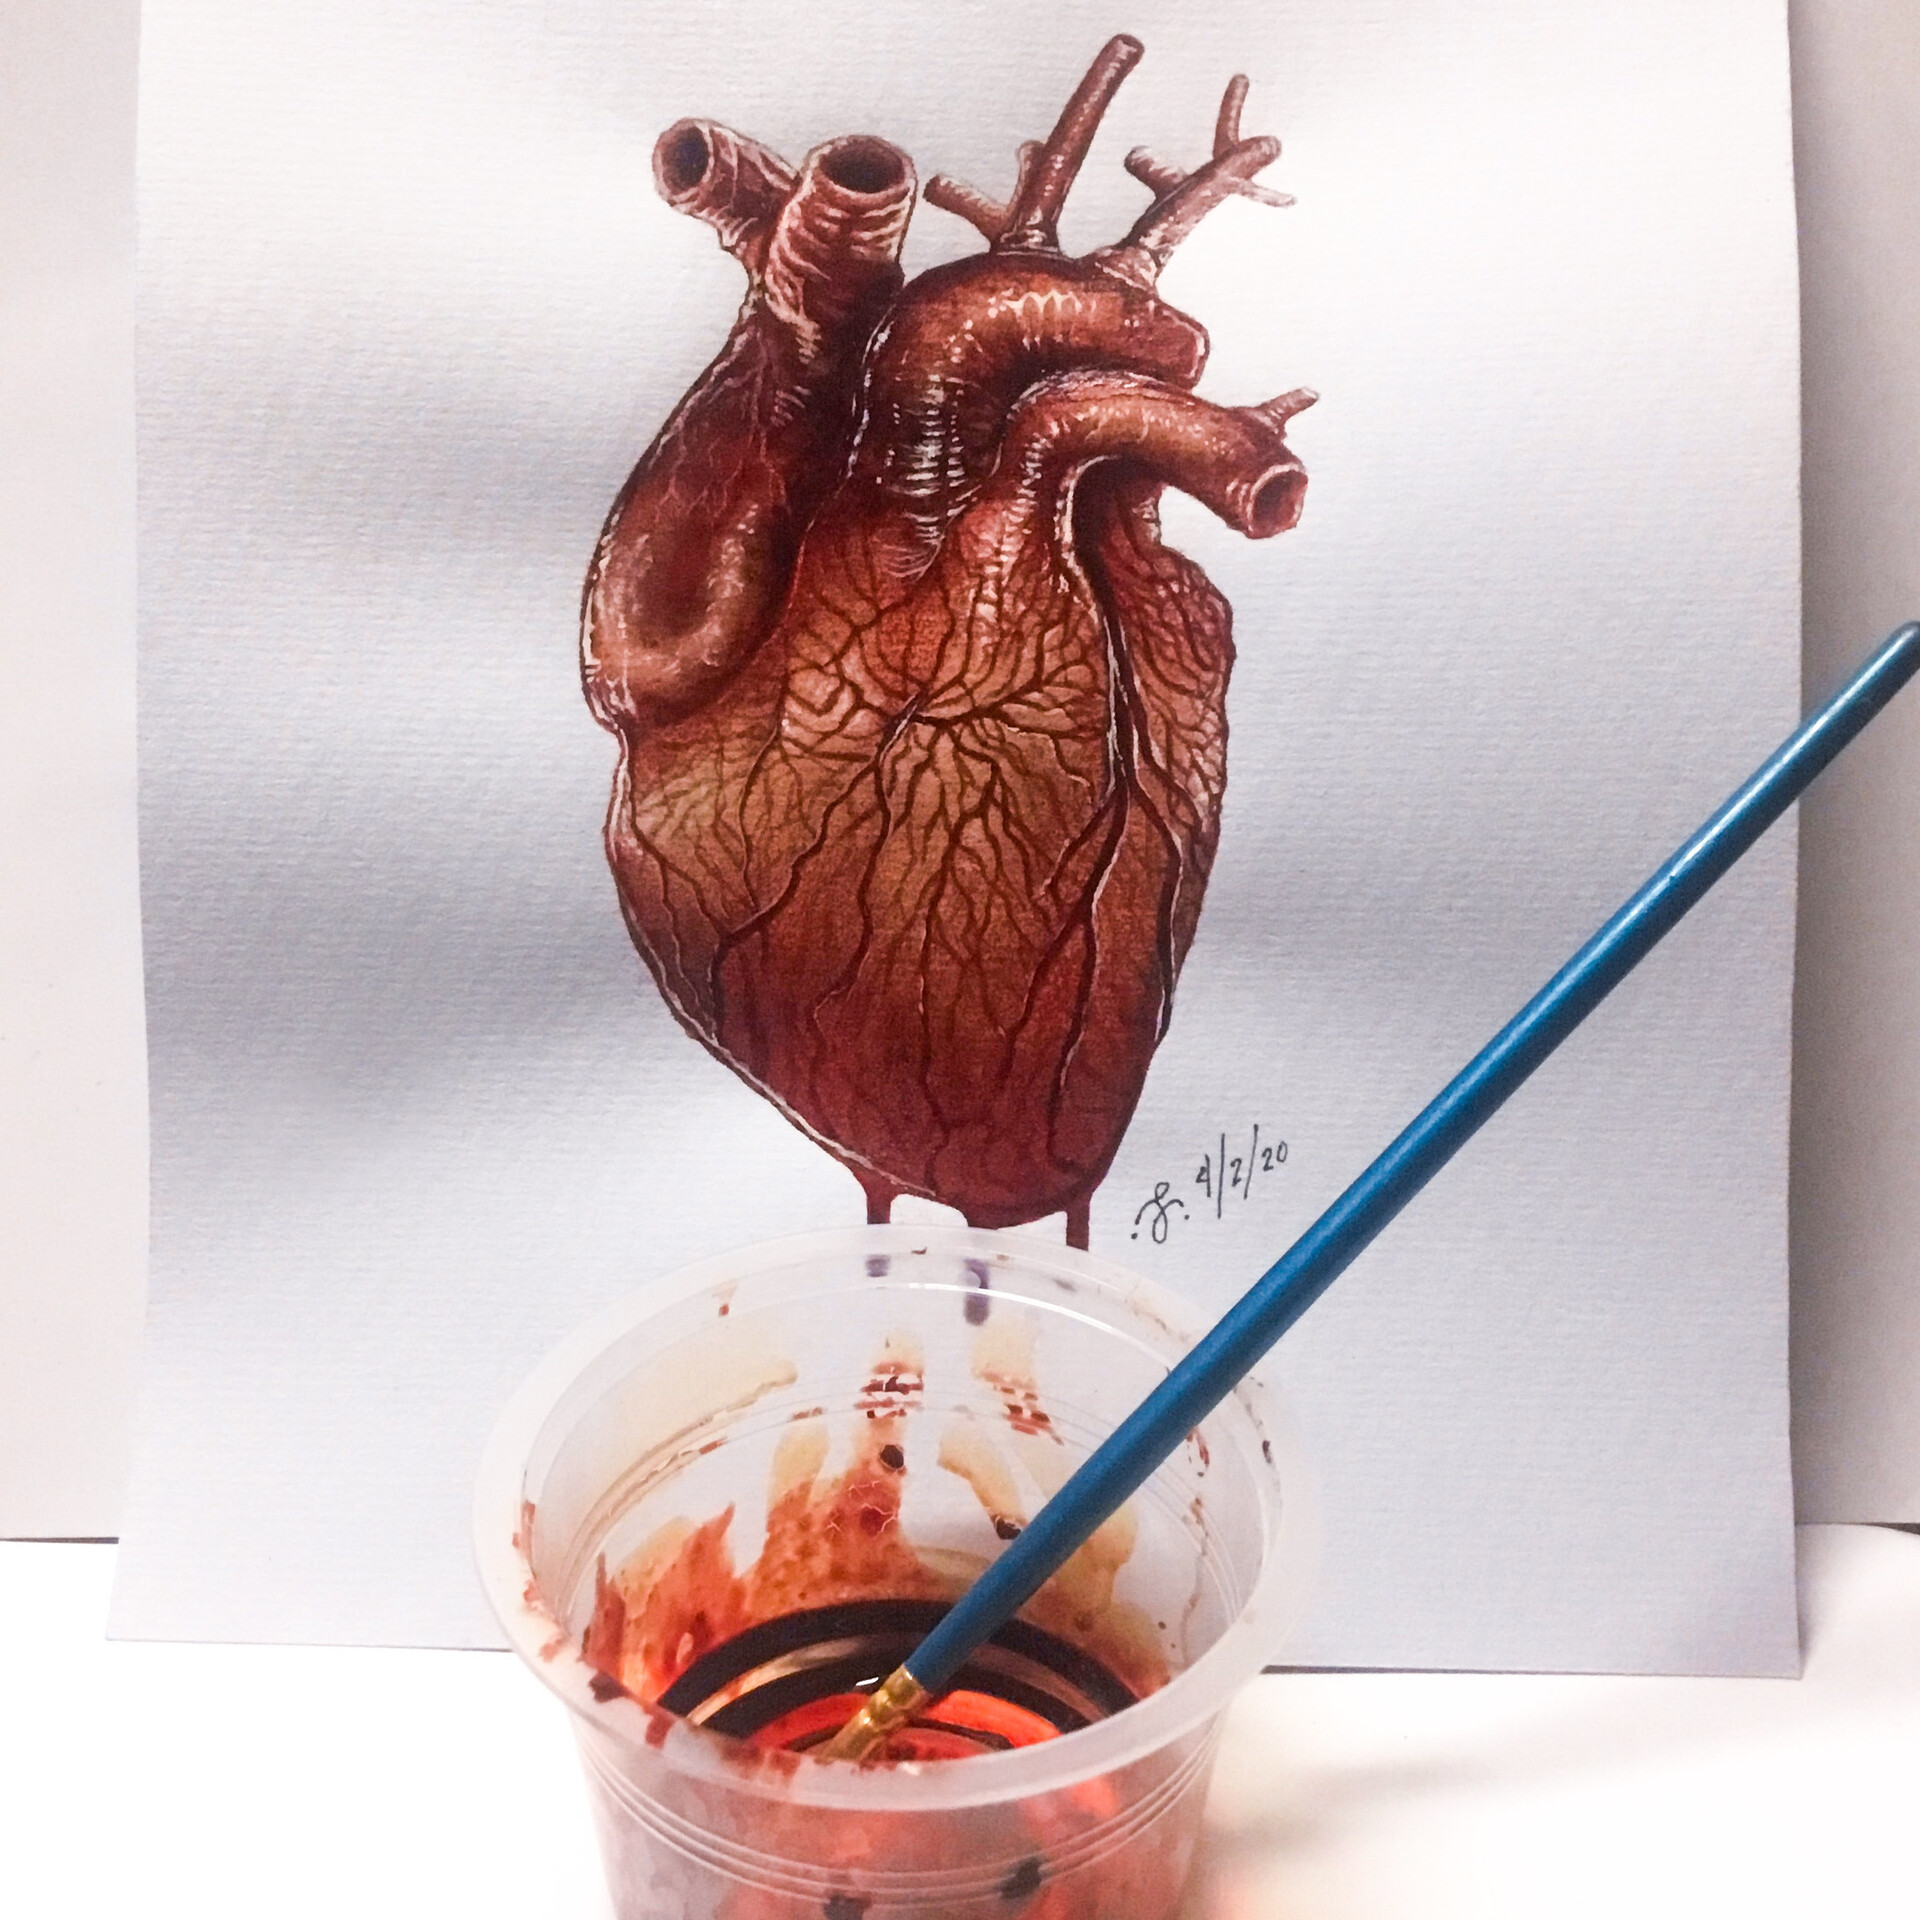 Closeup Multicolored Pencil Drawing Crayon Hand Drawn Anatomic Portrait Of  One Blood-red Carmine Human Heart Cardiac Chamber With Great Vessels On  Texture Paper Over White Background, Vertical Picture Stock Photo, Picture  and